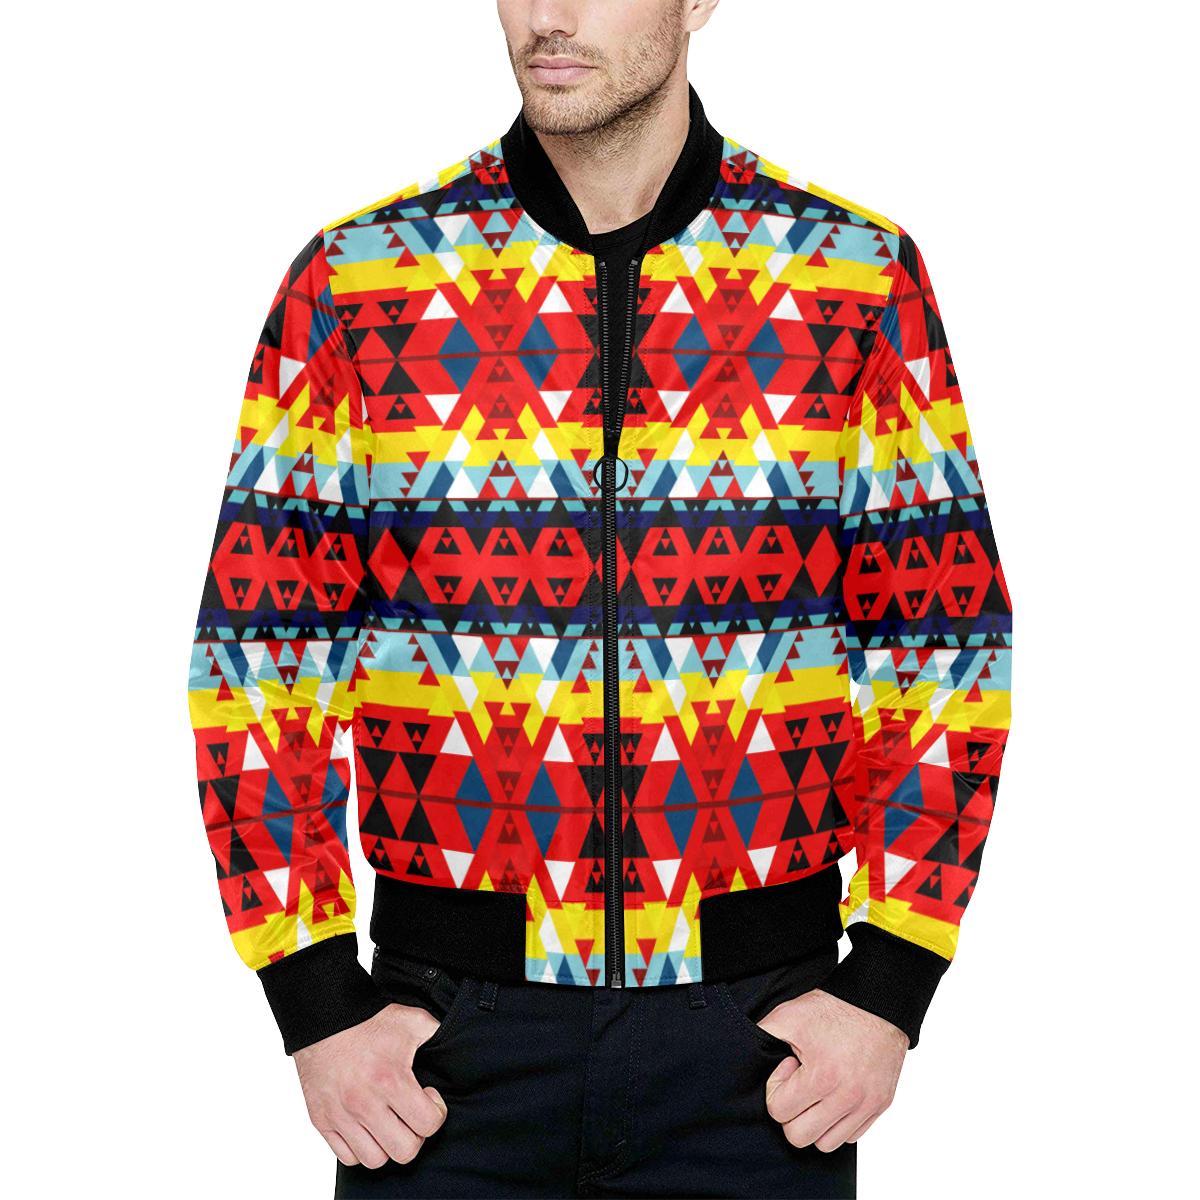 Writing on Stone Enemy Retreat Unisex Heavy Bomber Jacket with Quilted Lining All Over Print Quilted Jacket for Men (H33) e-joyer 